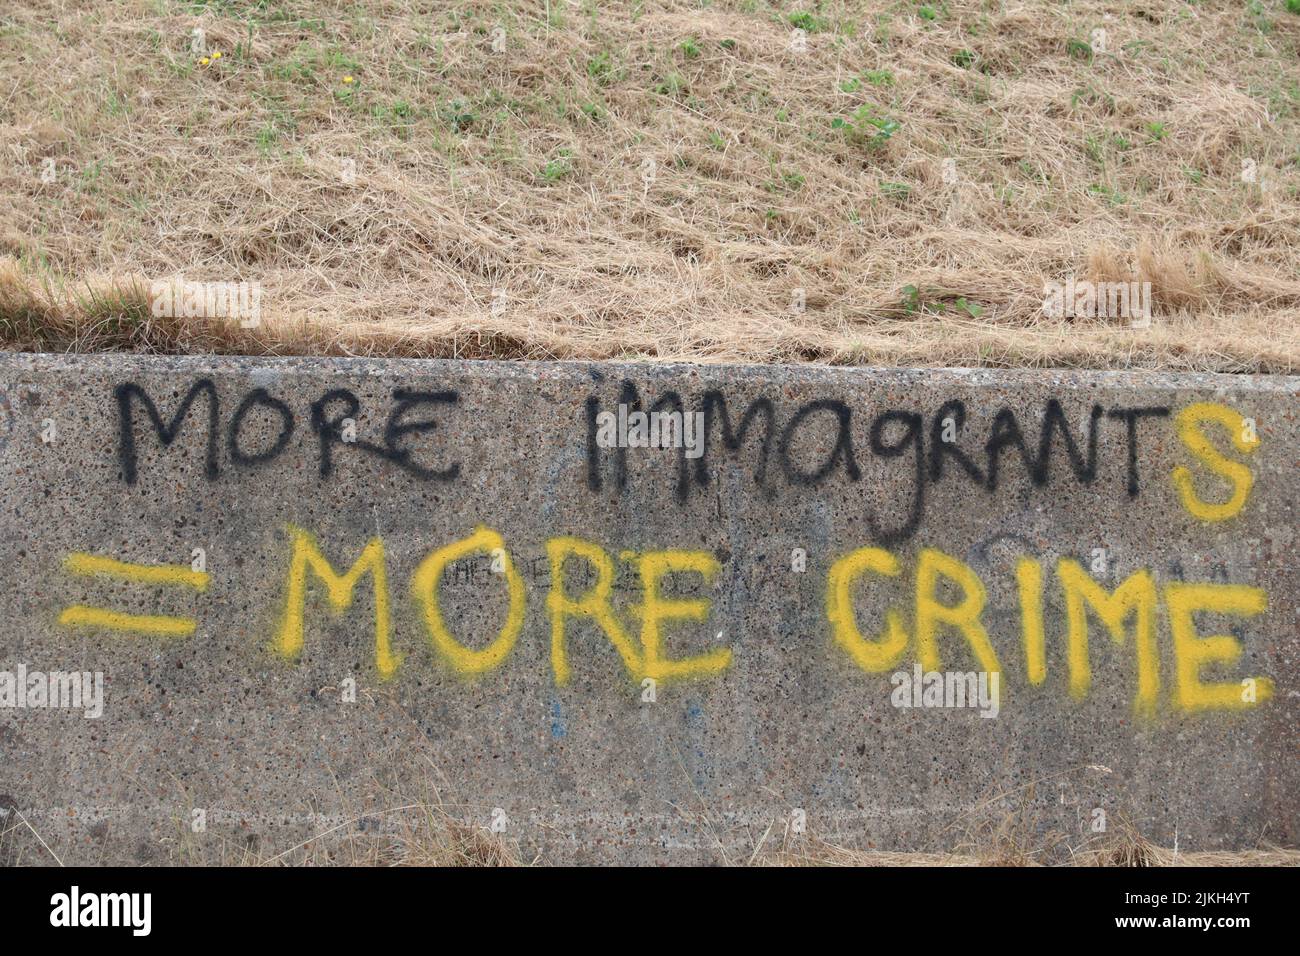 GRAFFITI THAT DISPLAYS VIEWS AGAINST MIGRANTS AND IMMIGRATION REGARDING CHANNEL CROSSINGS Stock Photo